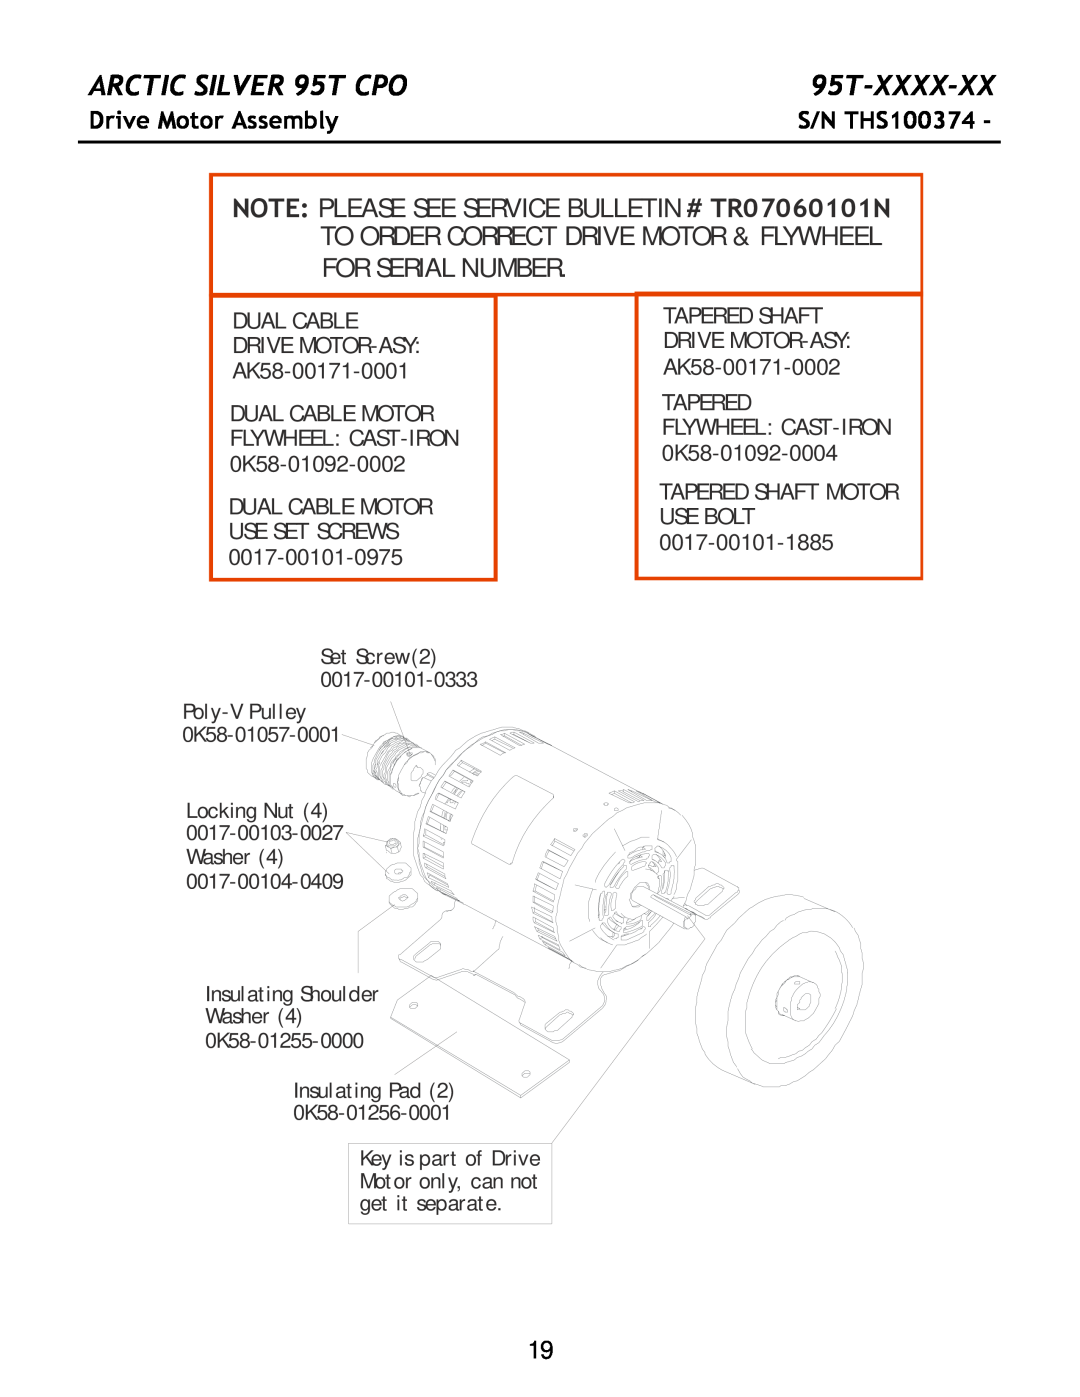 Life Fitness manual Drive Motor Assembly, ARCTIC SILVER 95T CPO, 95T-XXXX-XX, S/N THS100374, For Serial Number 